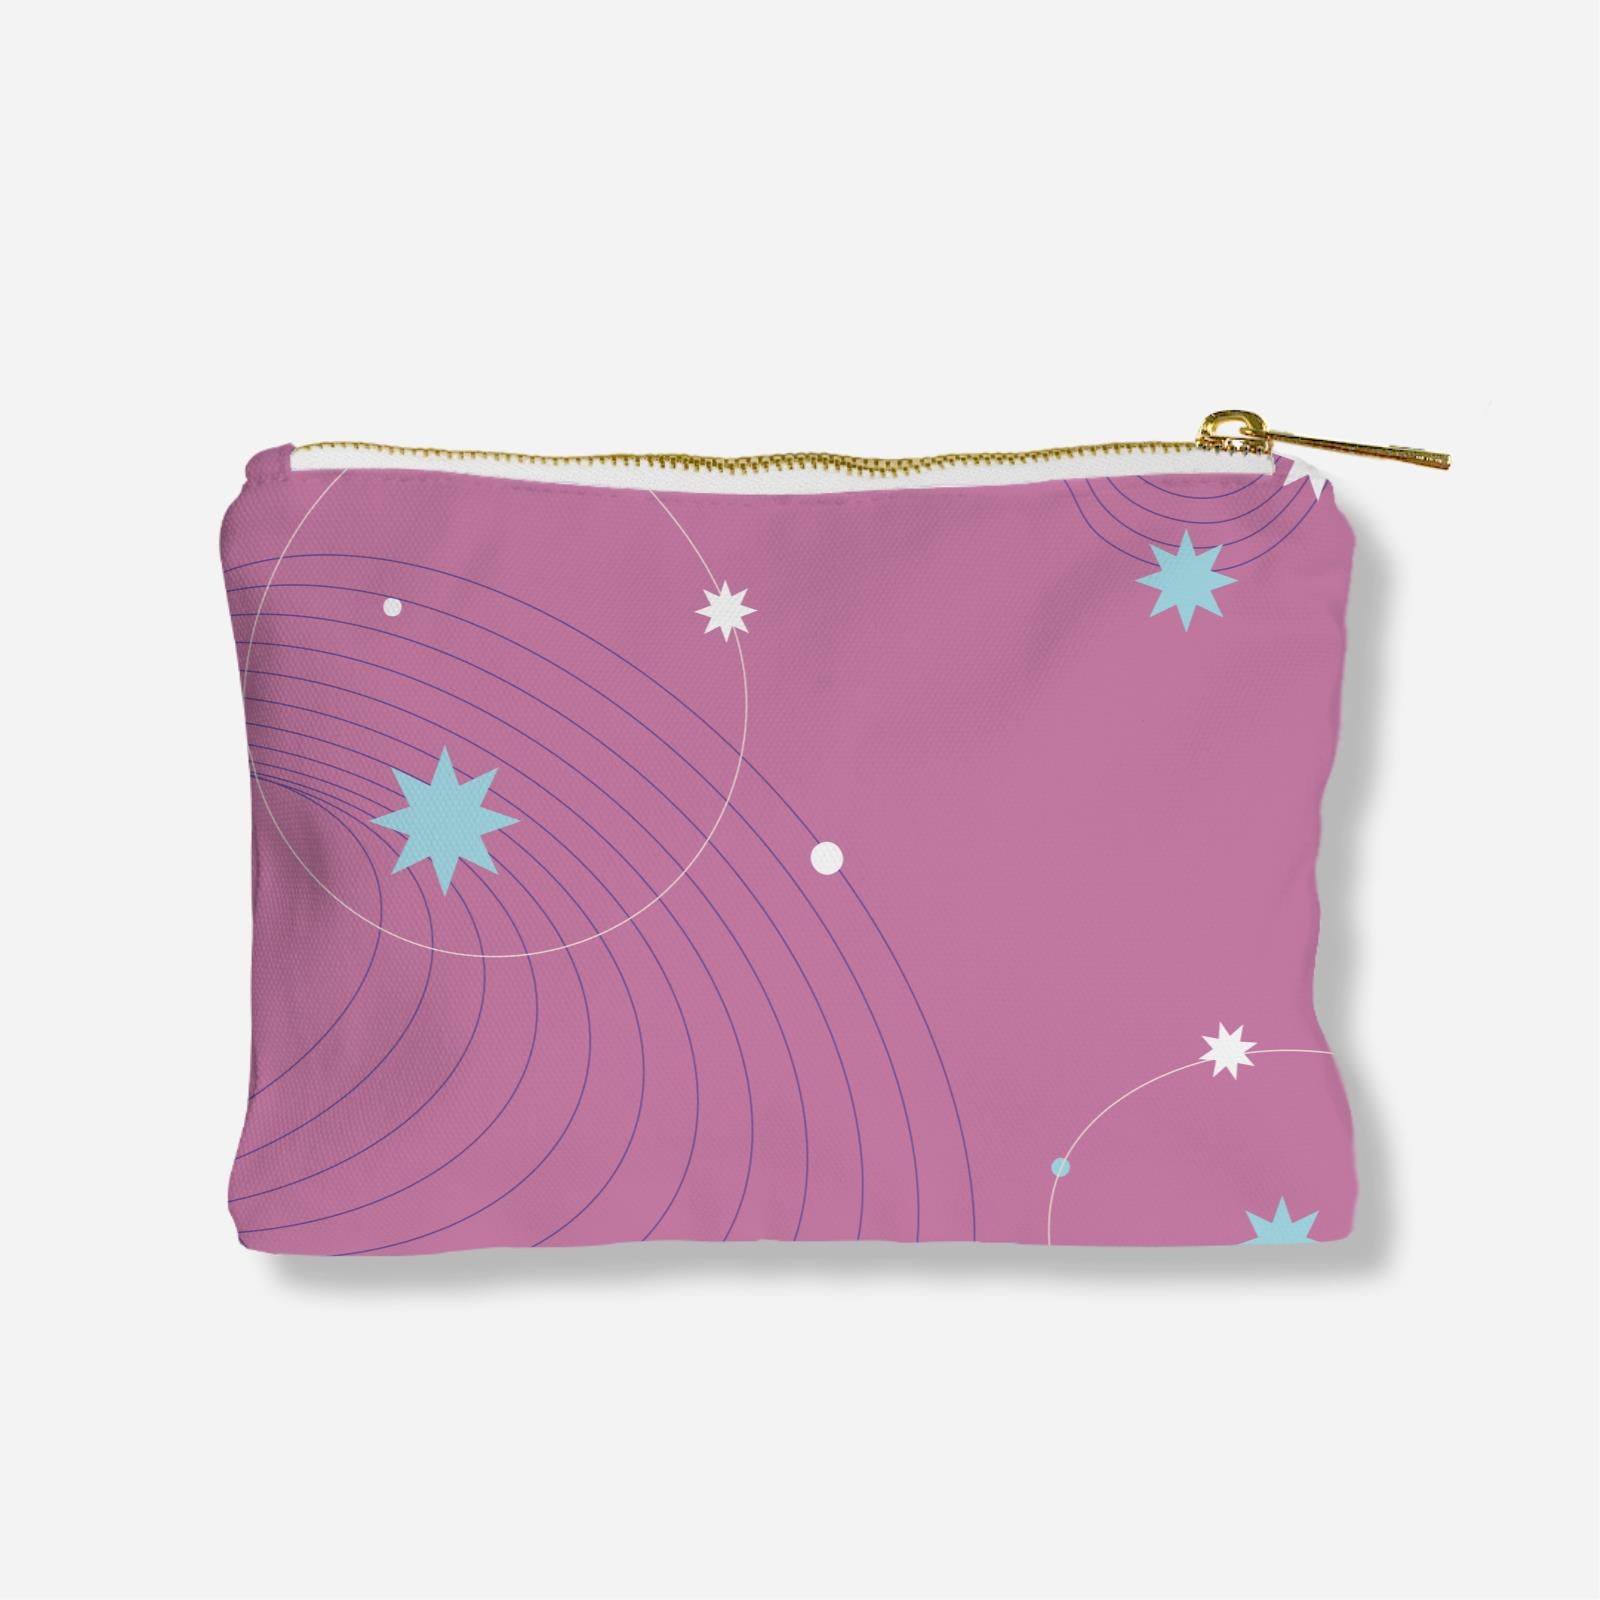 Be Confident Series Zipper Pouch - A Goal Without a Plan Is Just A Wish - Pink